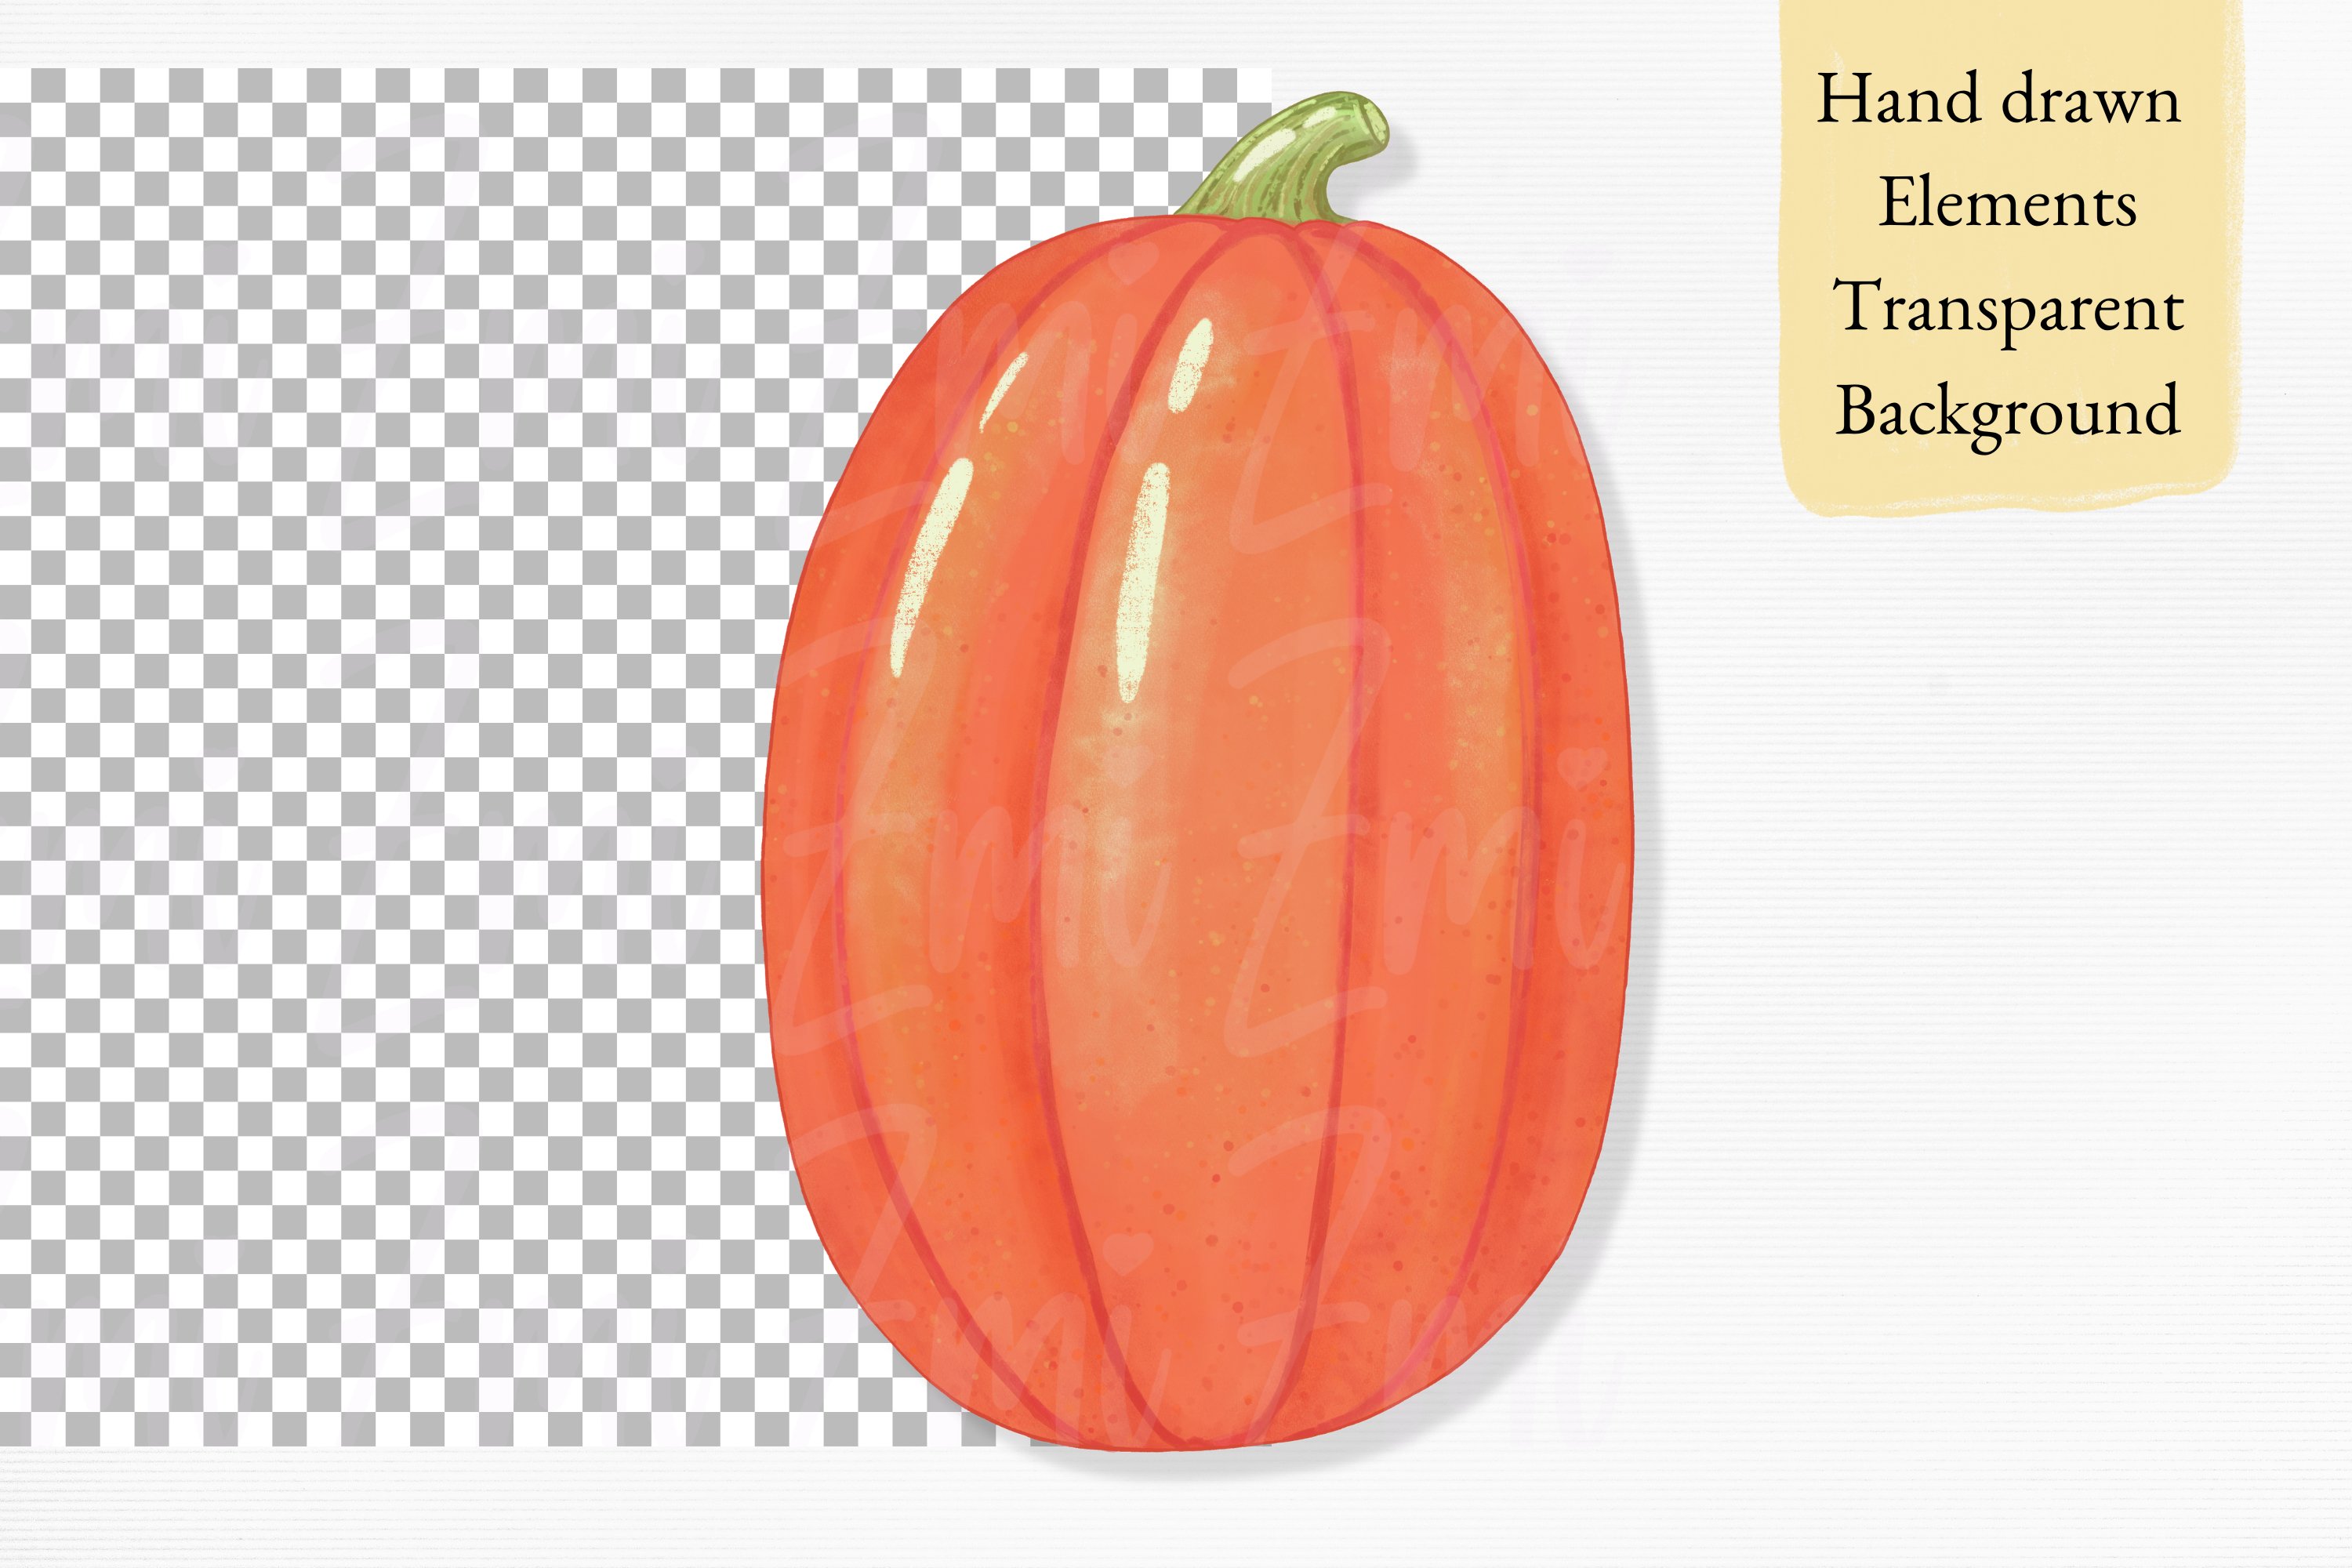 Illustration of a pumpkin on a transparent and gray background.